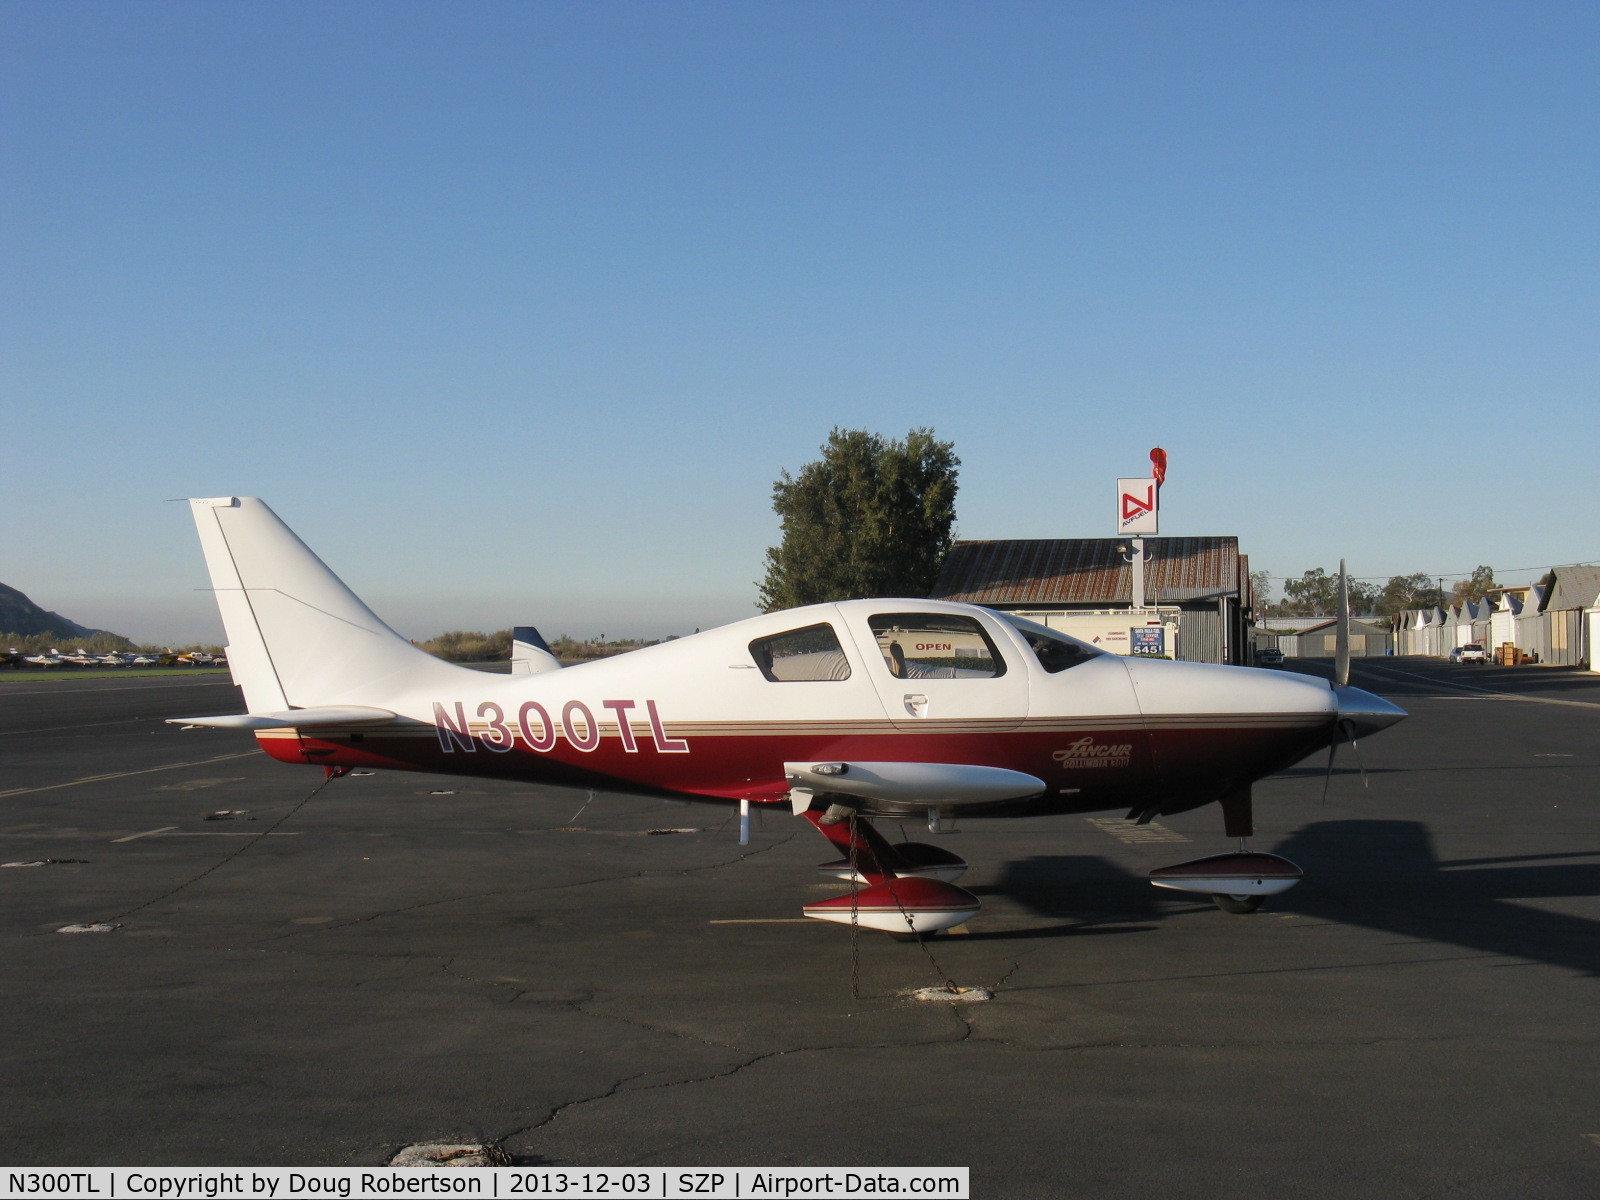 N300TL, 2003 Lancair LC-40-550FG C/N 40067, 2003 Lancair LC-40-550FG COLUMBIA 300 TOURER, Continental IO-550-N2B 300 Hp with FADEC, 4 place, emergency exit via large baggage door, Vne 235 kts, 270 mph. Normal cruise at 75% power 190 kts, 219 mph